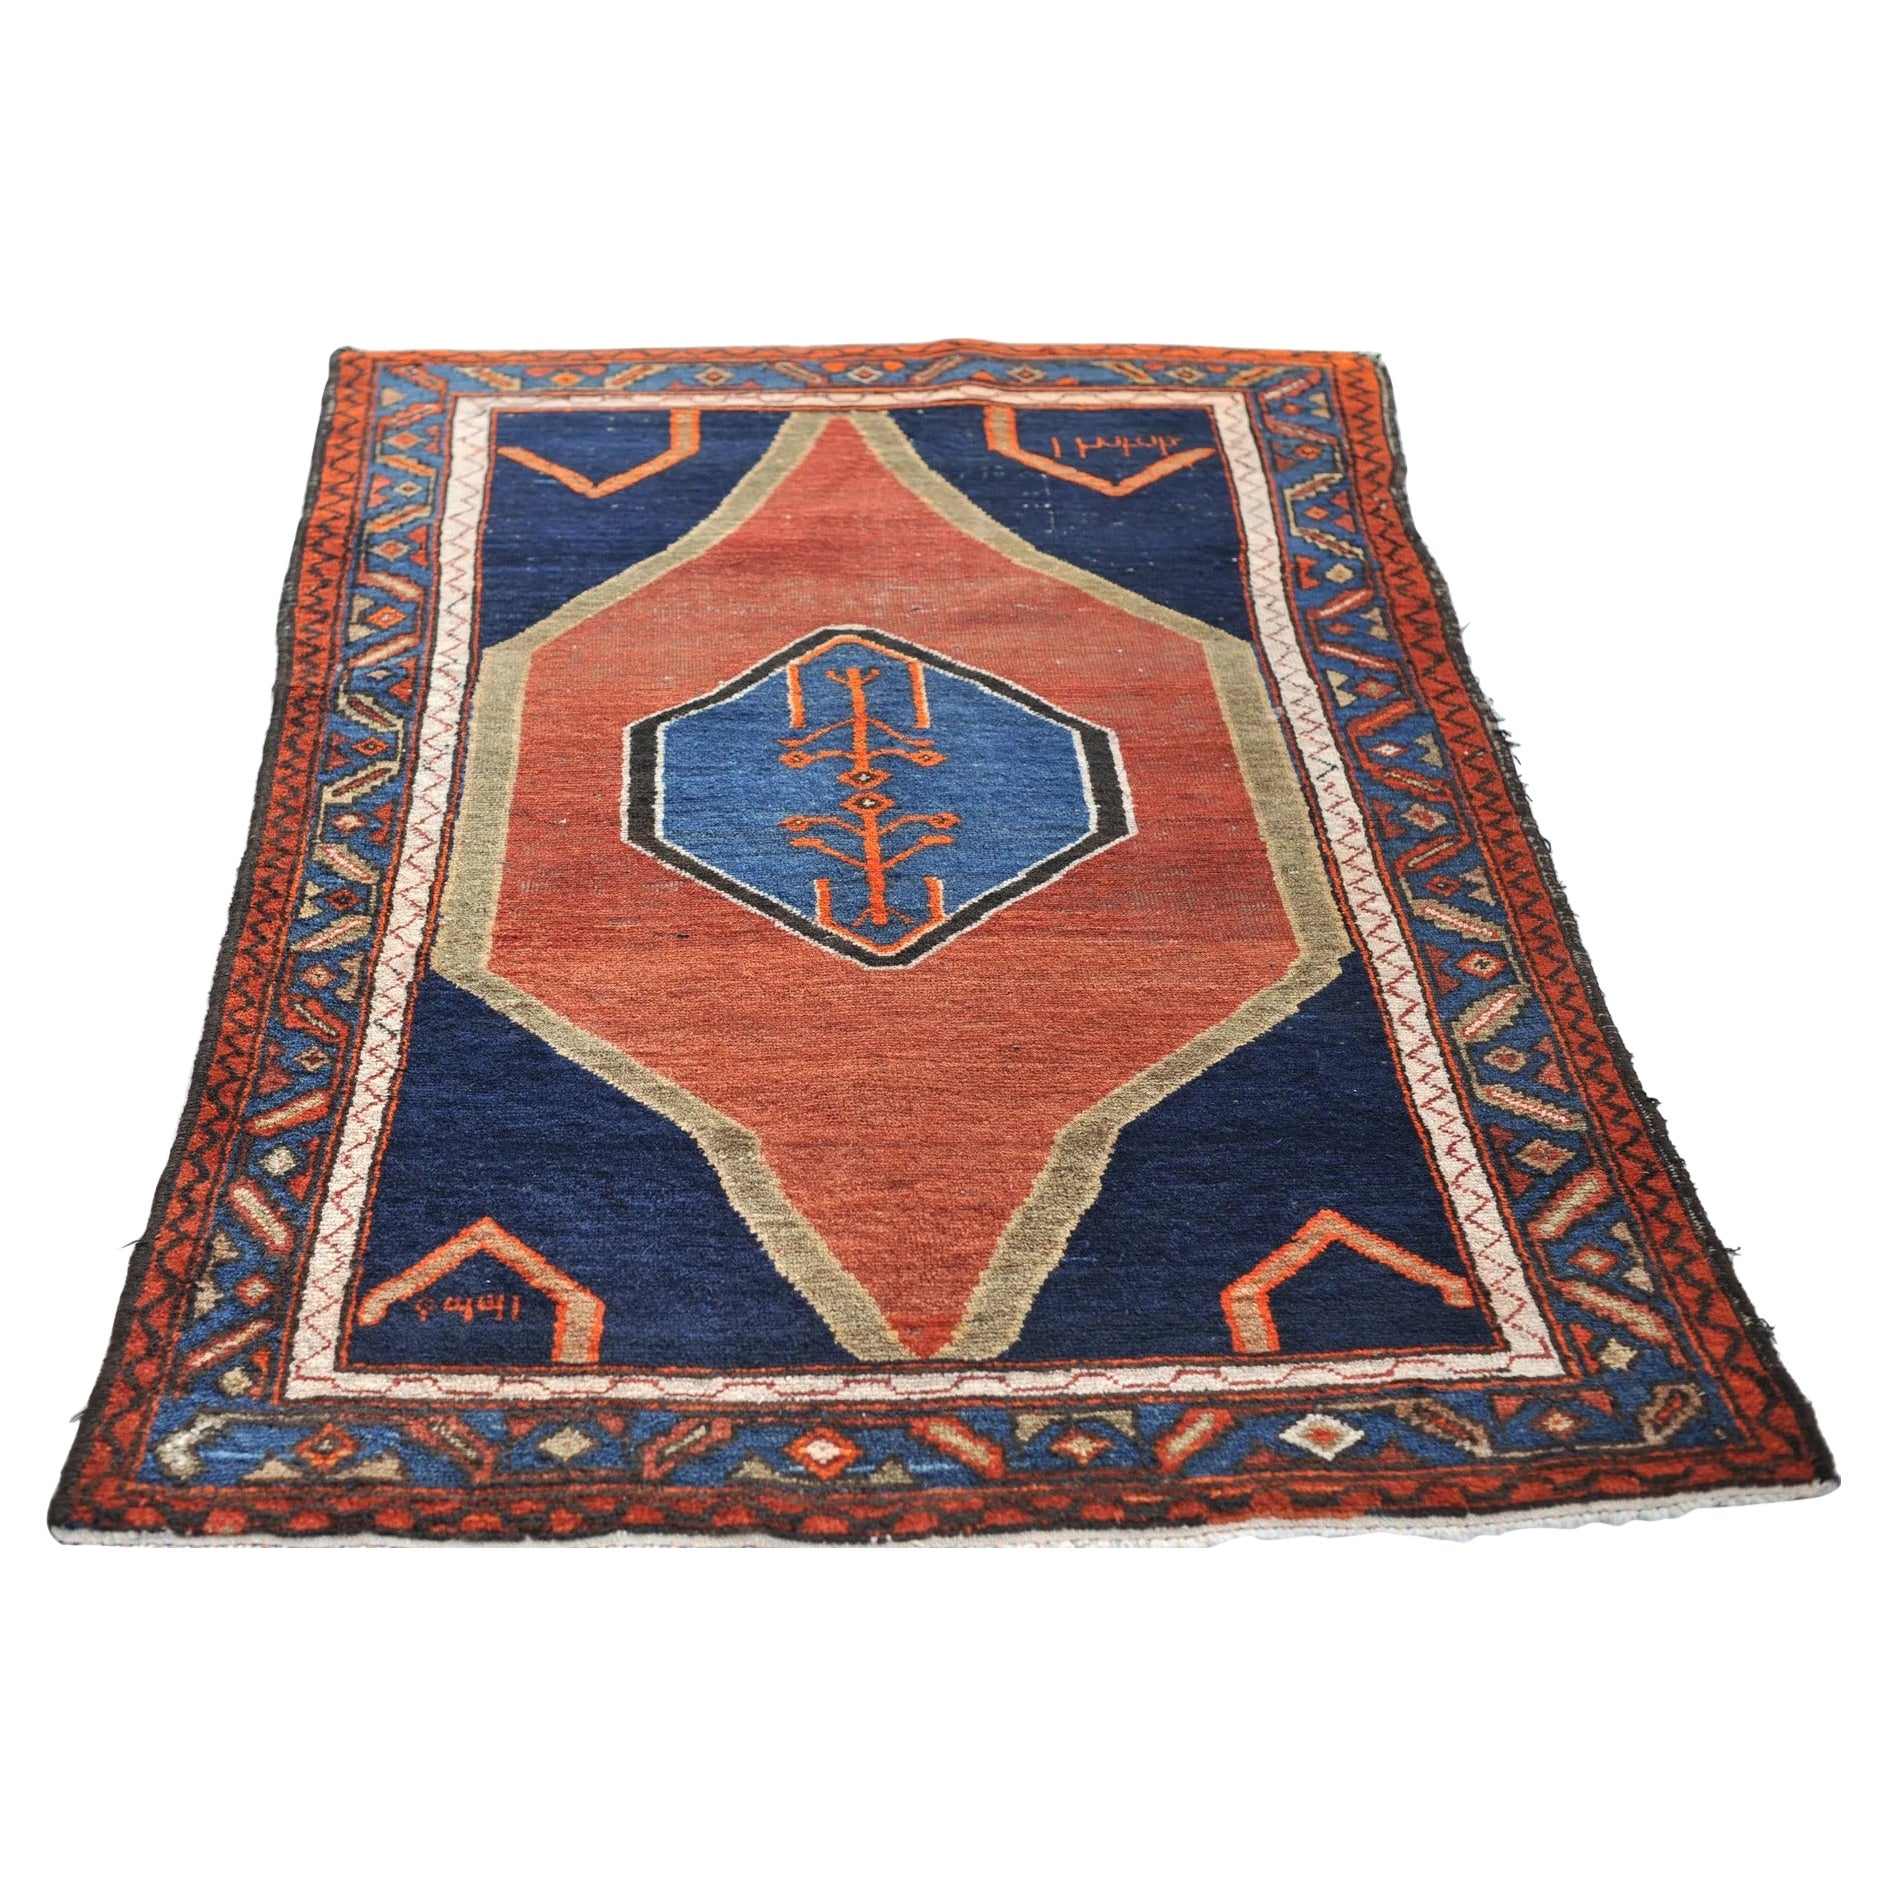 Dated Minimal Tribal Beauty Antique Rug, 1954 For Sale